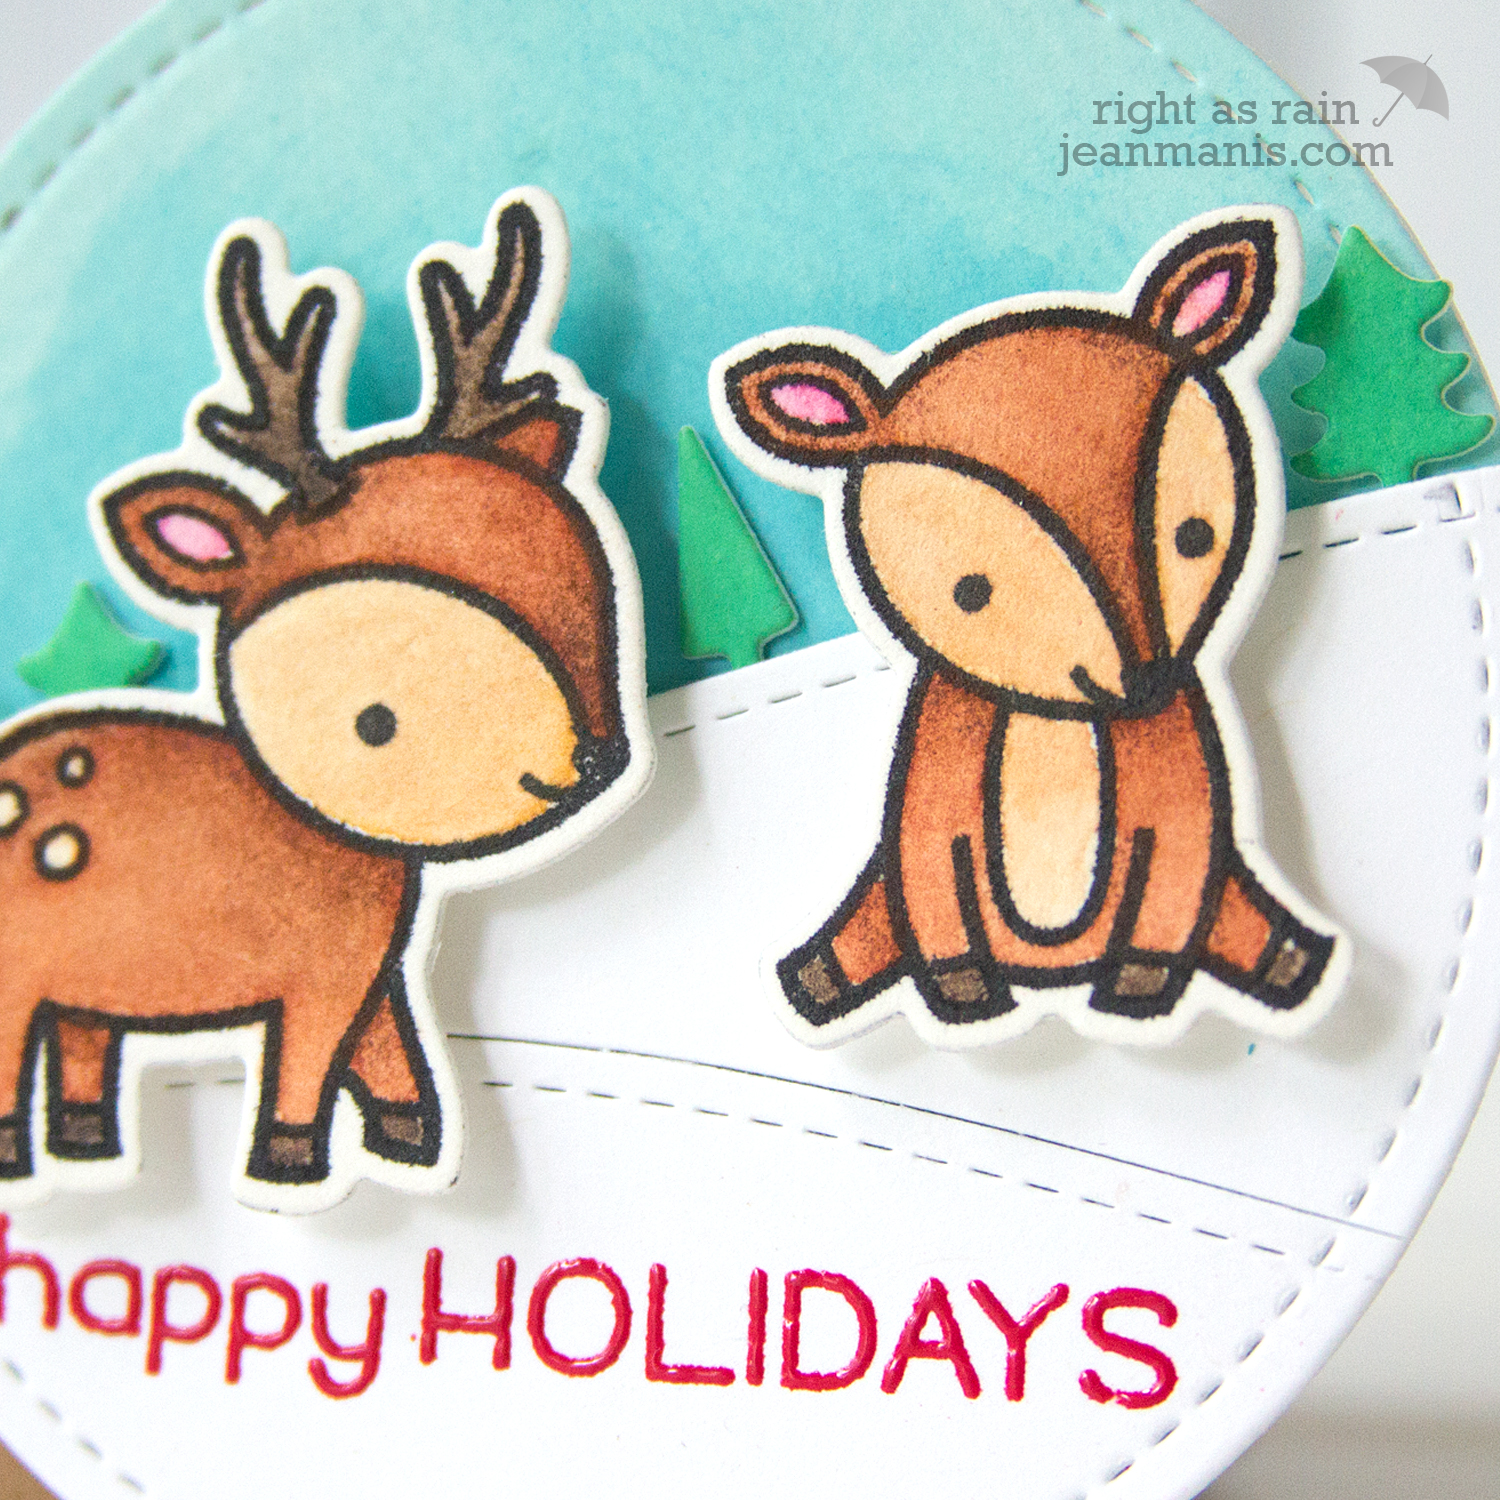 The 25 Days of Christmas Tags 2017 - Day 12 Lawn Fawn